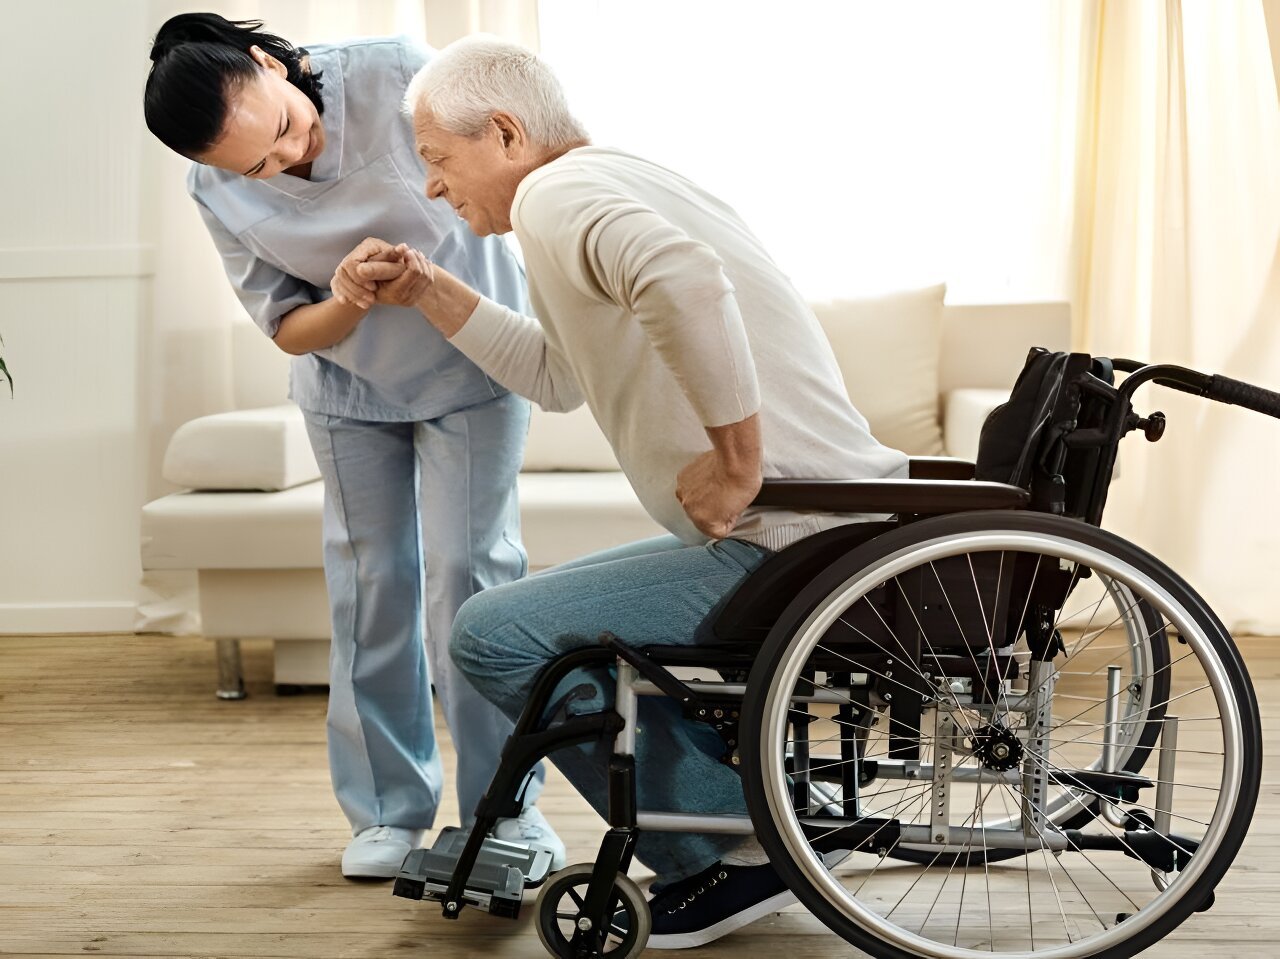 Staffing shortages at nursing homes continue Report